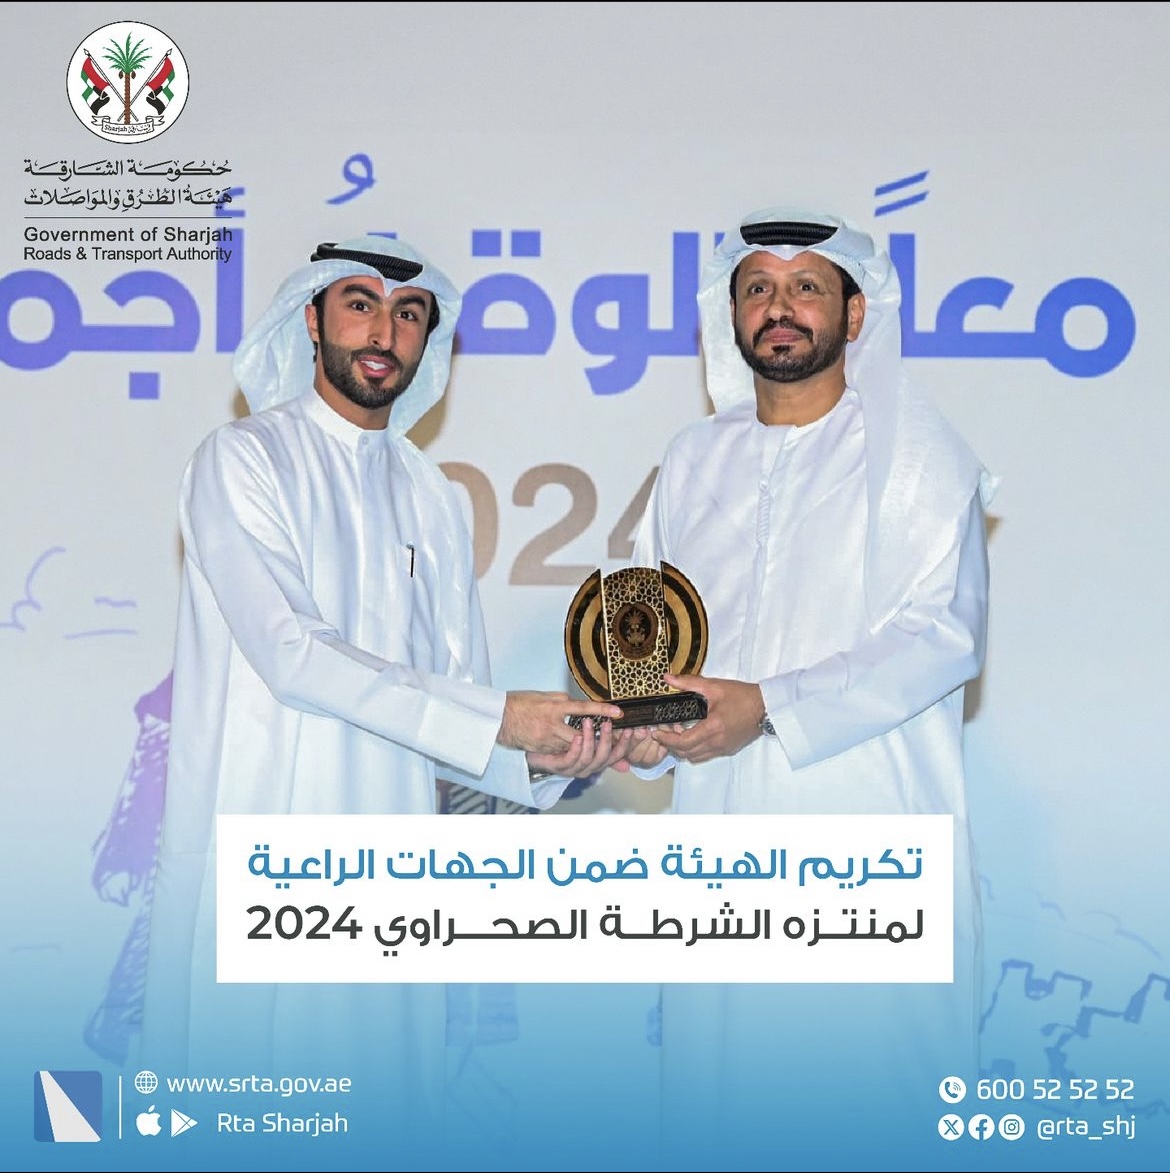 Honoring the Authority as one of the sponsors of Sharjah Desert Park 2024